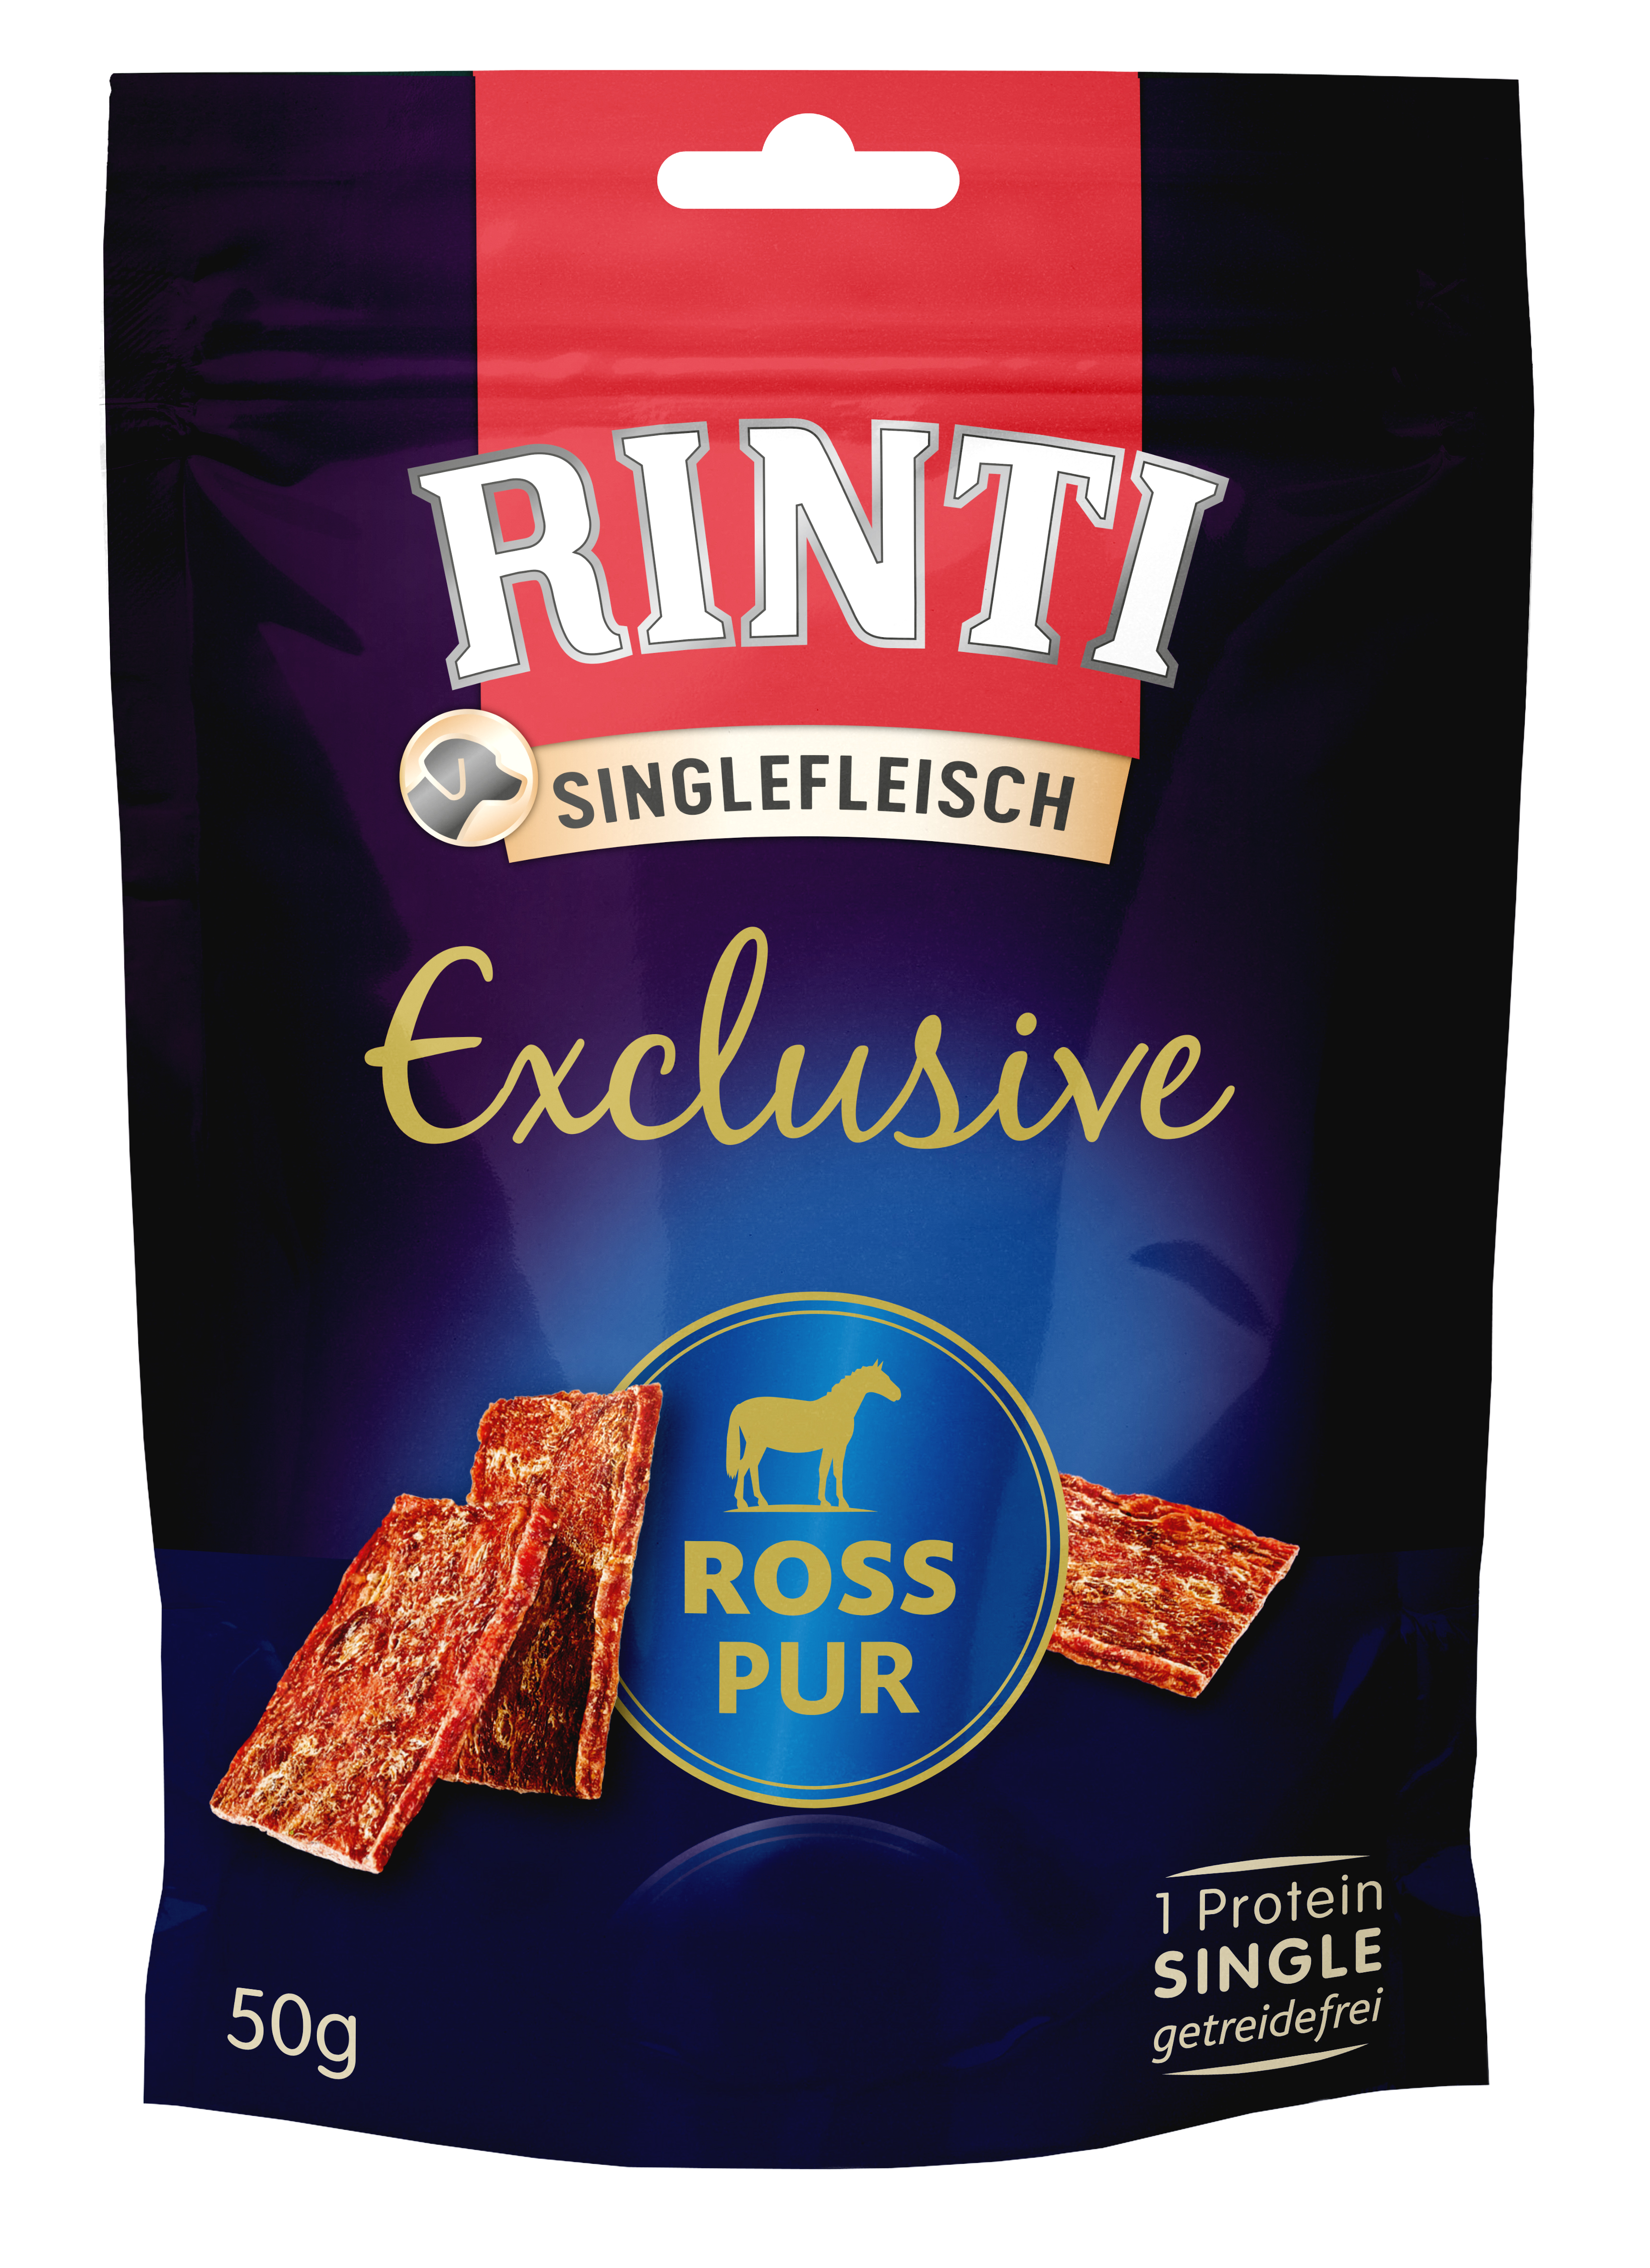 RINTI Exclusive Snack Ross 50g